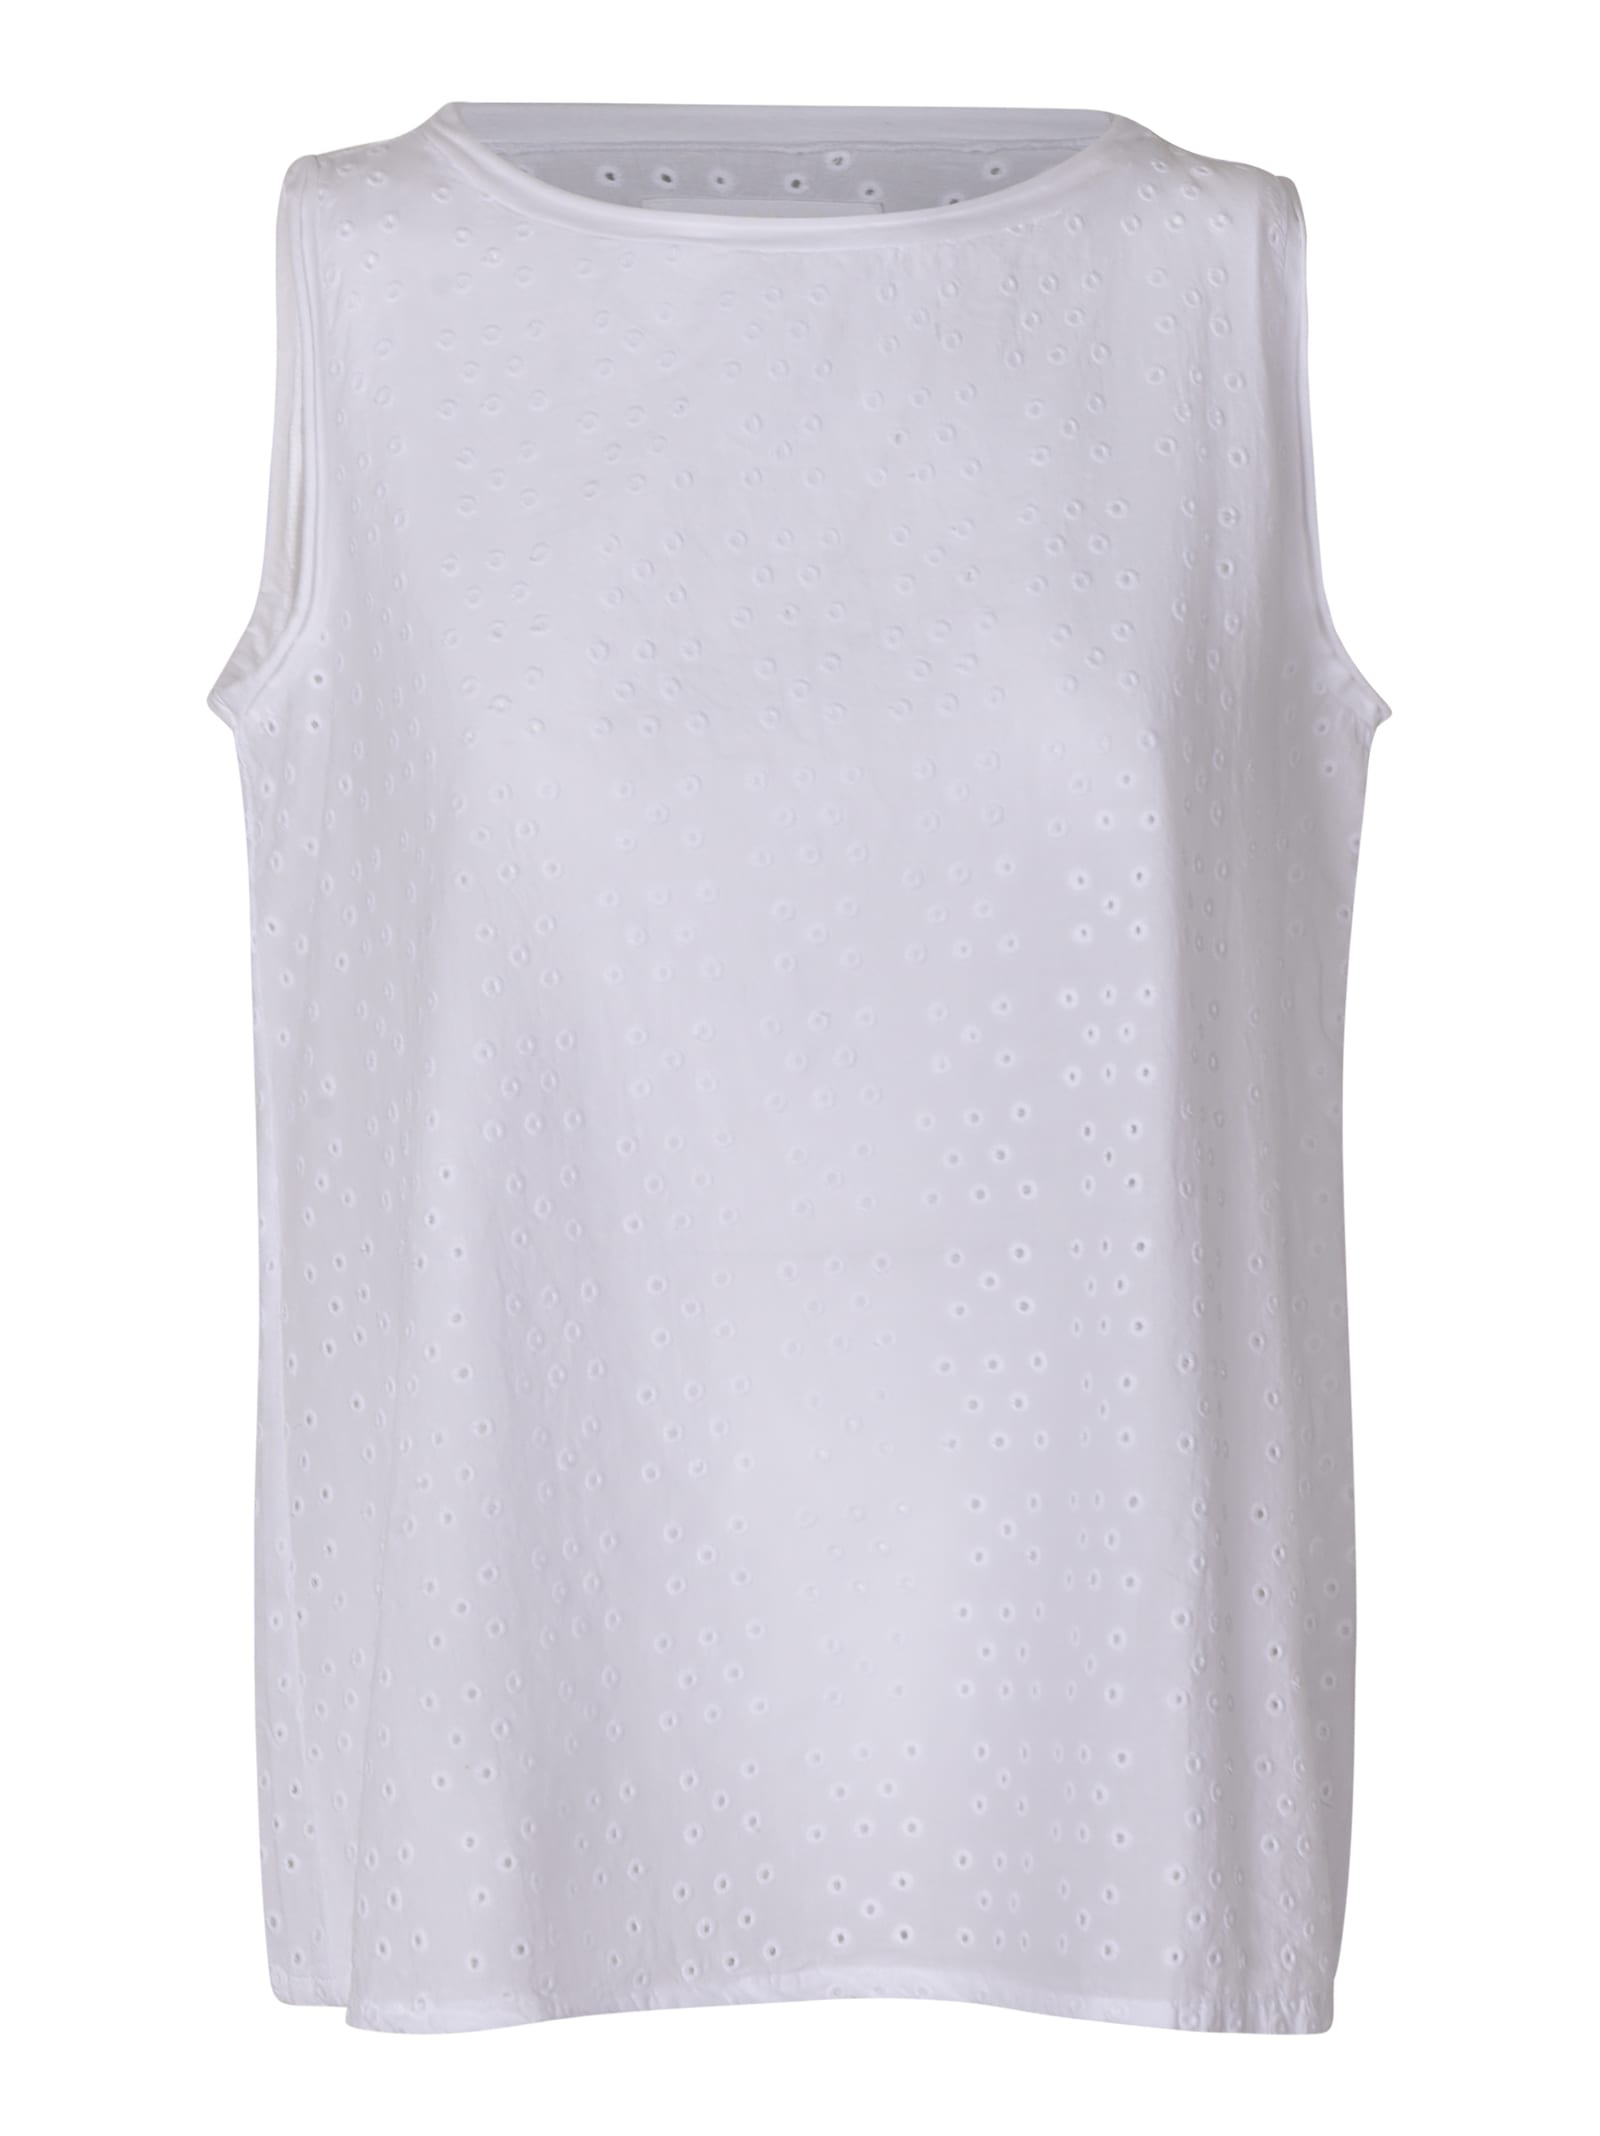 Labo.Art Embroidered Eyelet Tank Top